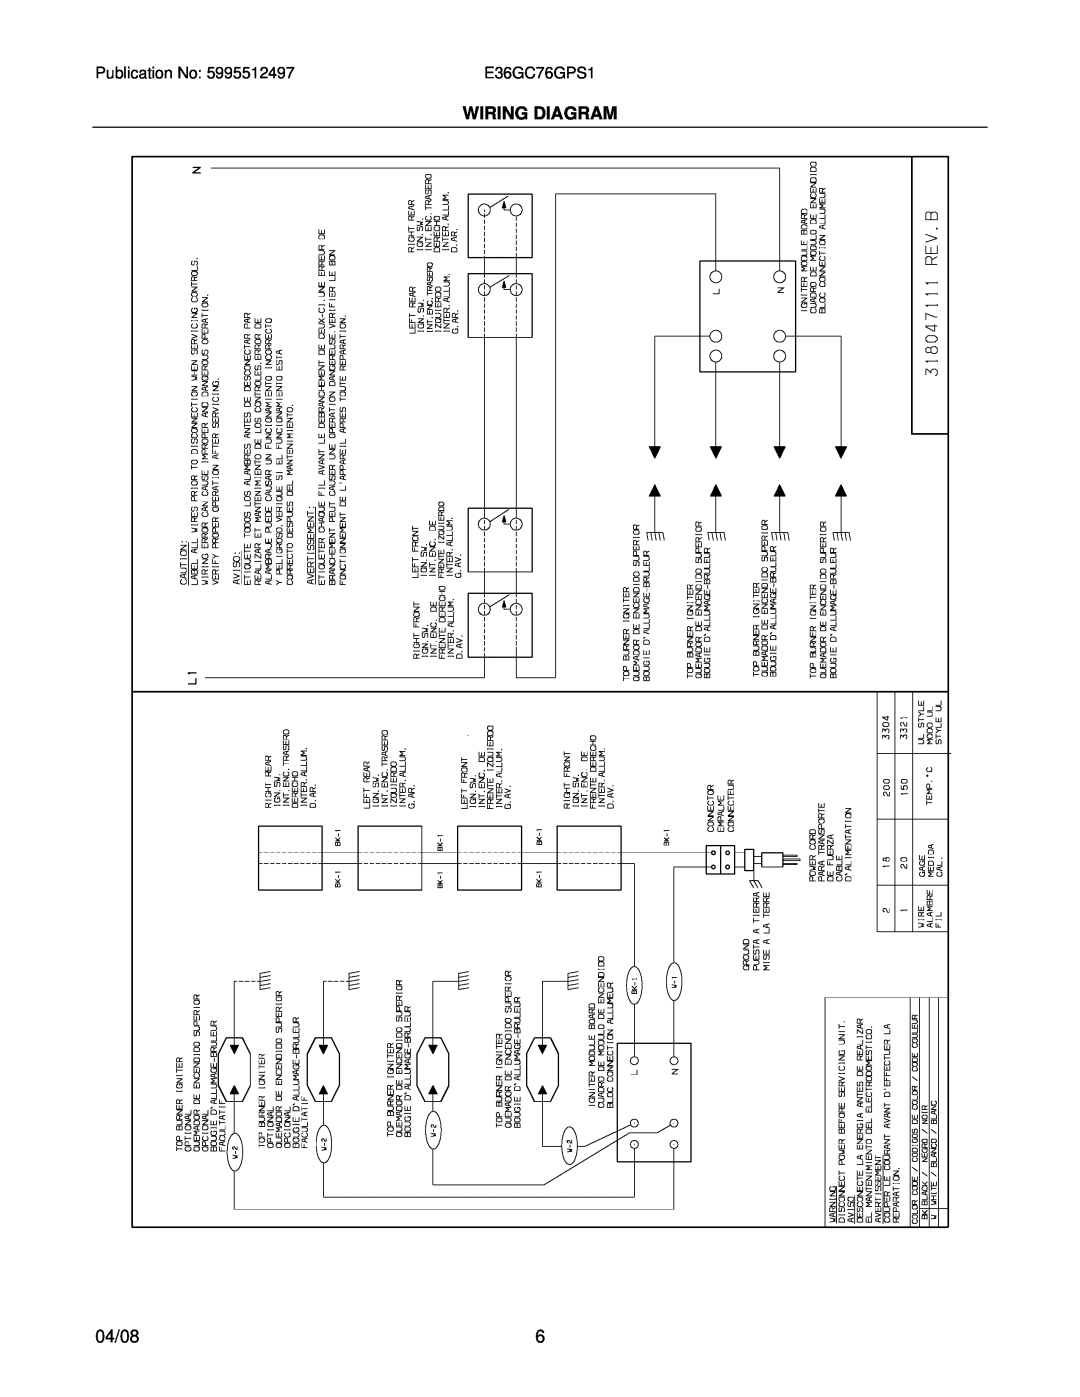 Electrolux E36GC76GPS1, 37766426970S1 installation instructions Wiring Diagram, 04/08 